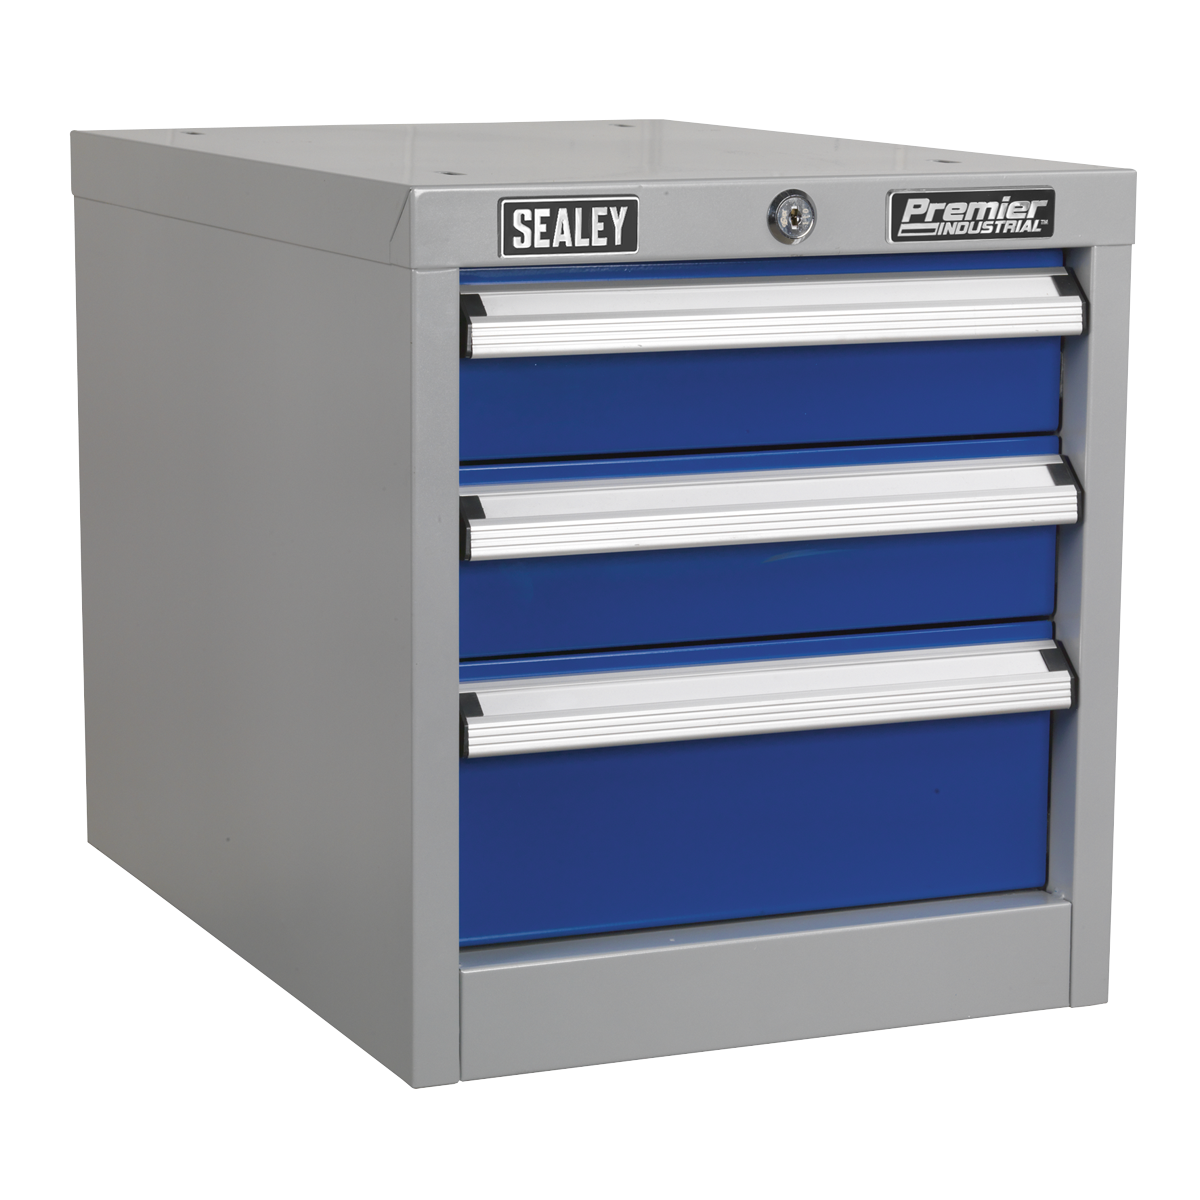 Industrial Triple Drawer Unit for API Series Workbenches - API16 - Farming Parts